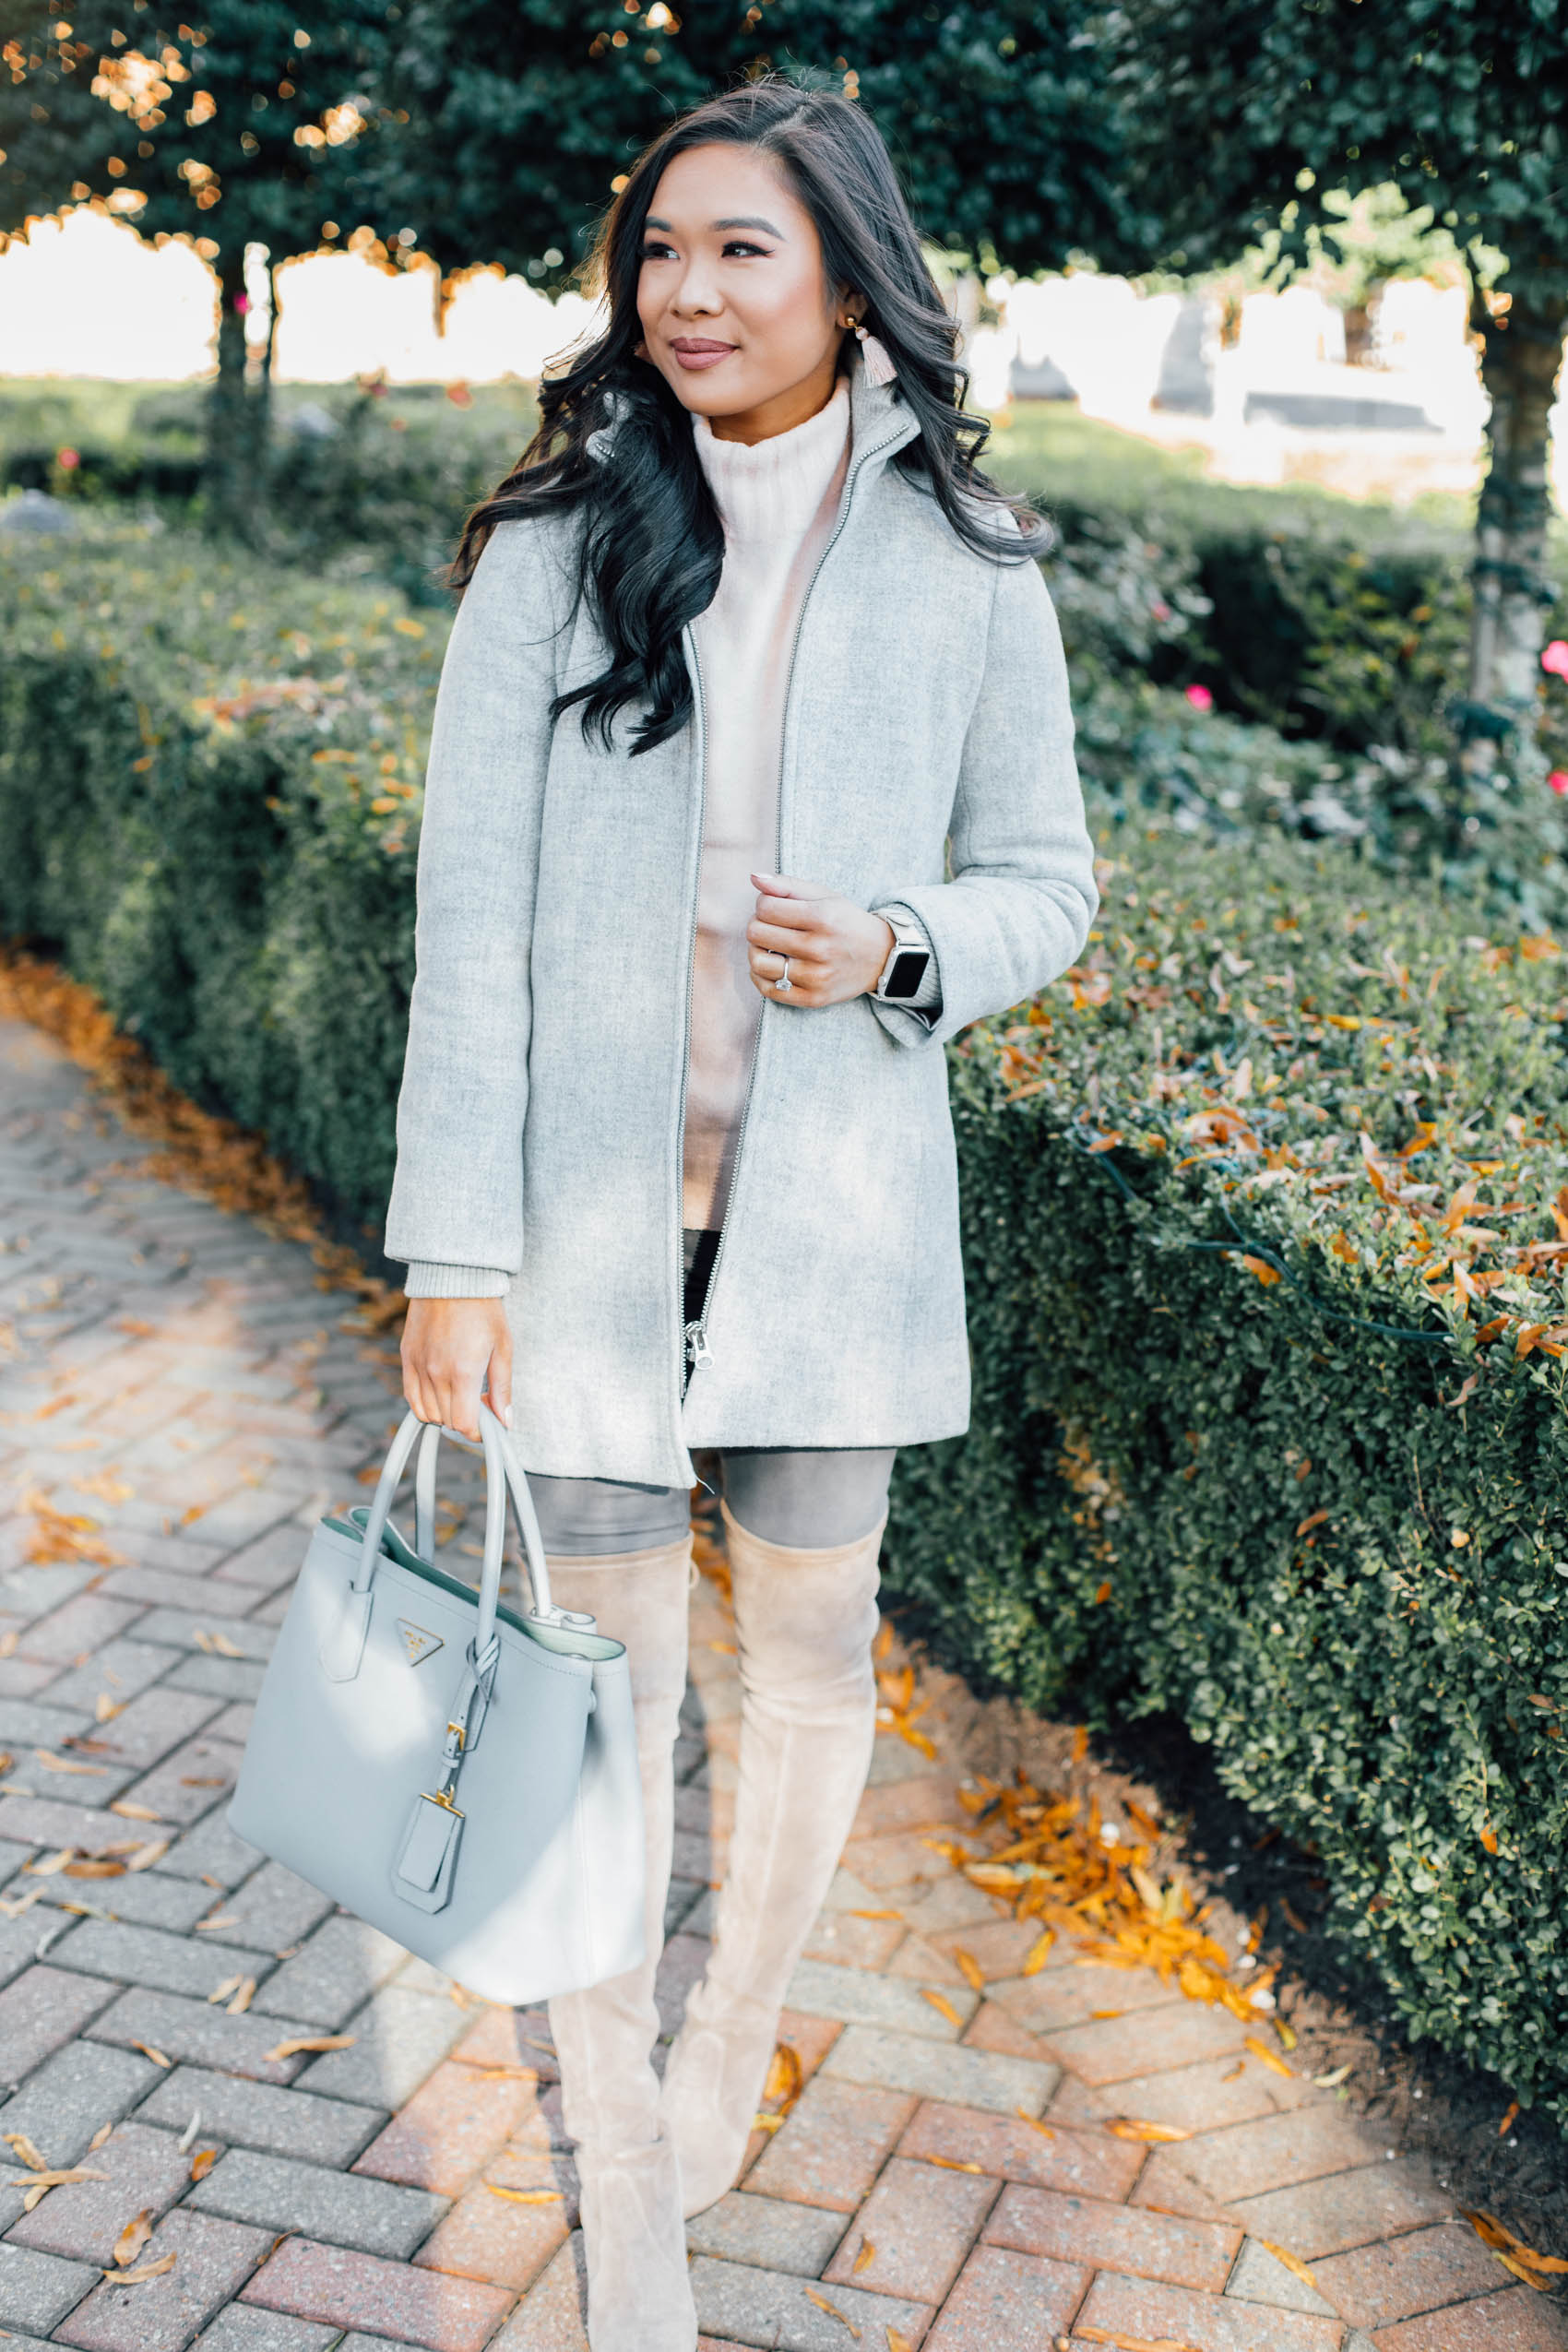 Blogger Hoang-Kim wears a wool winter coat perfect for petites